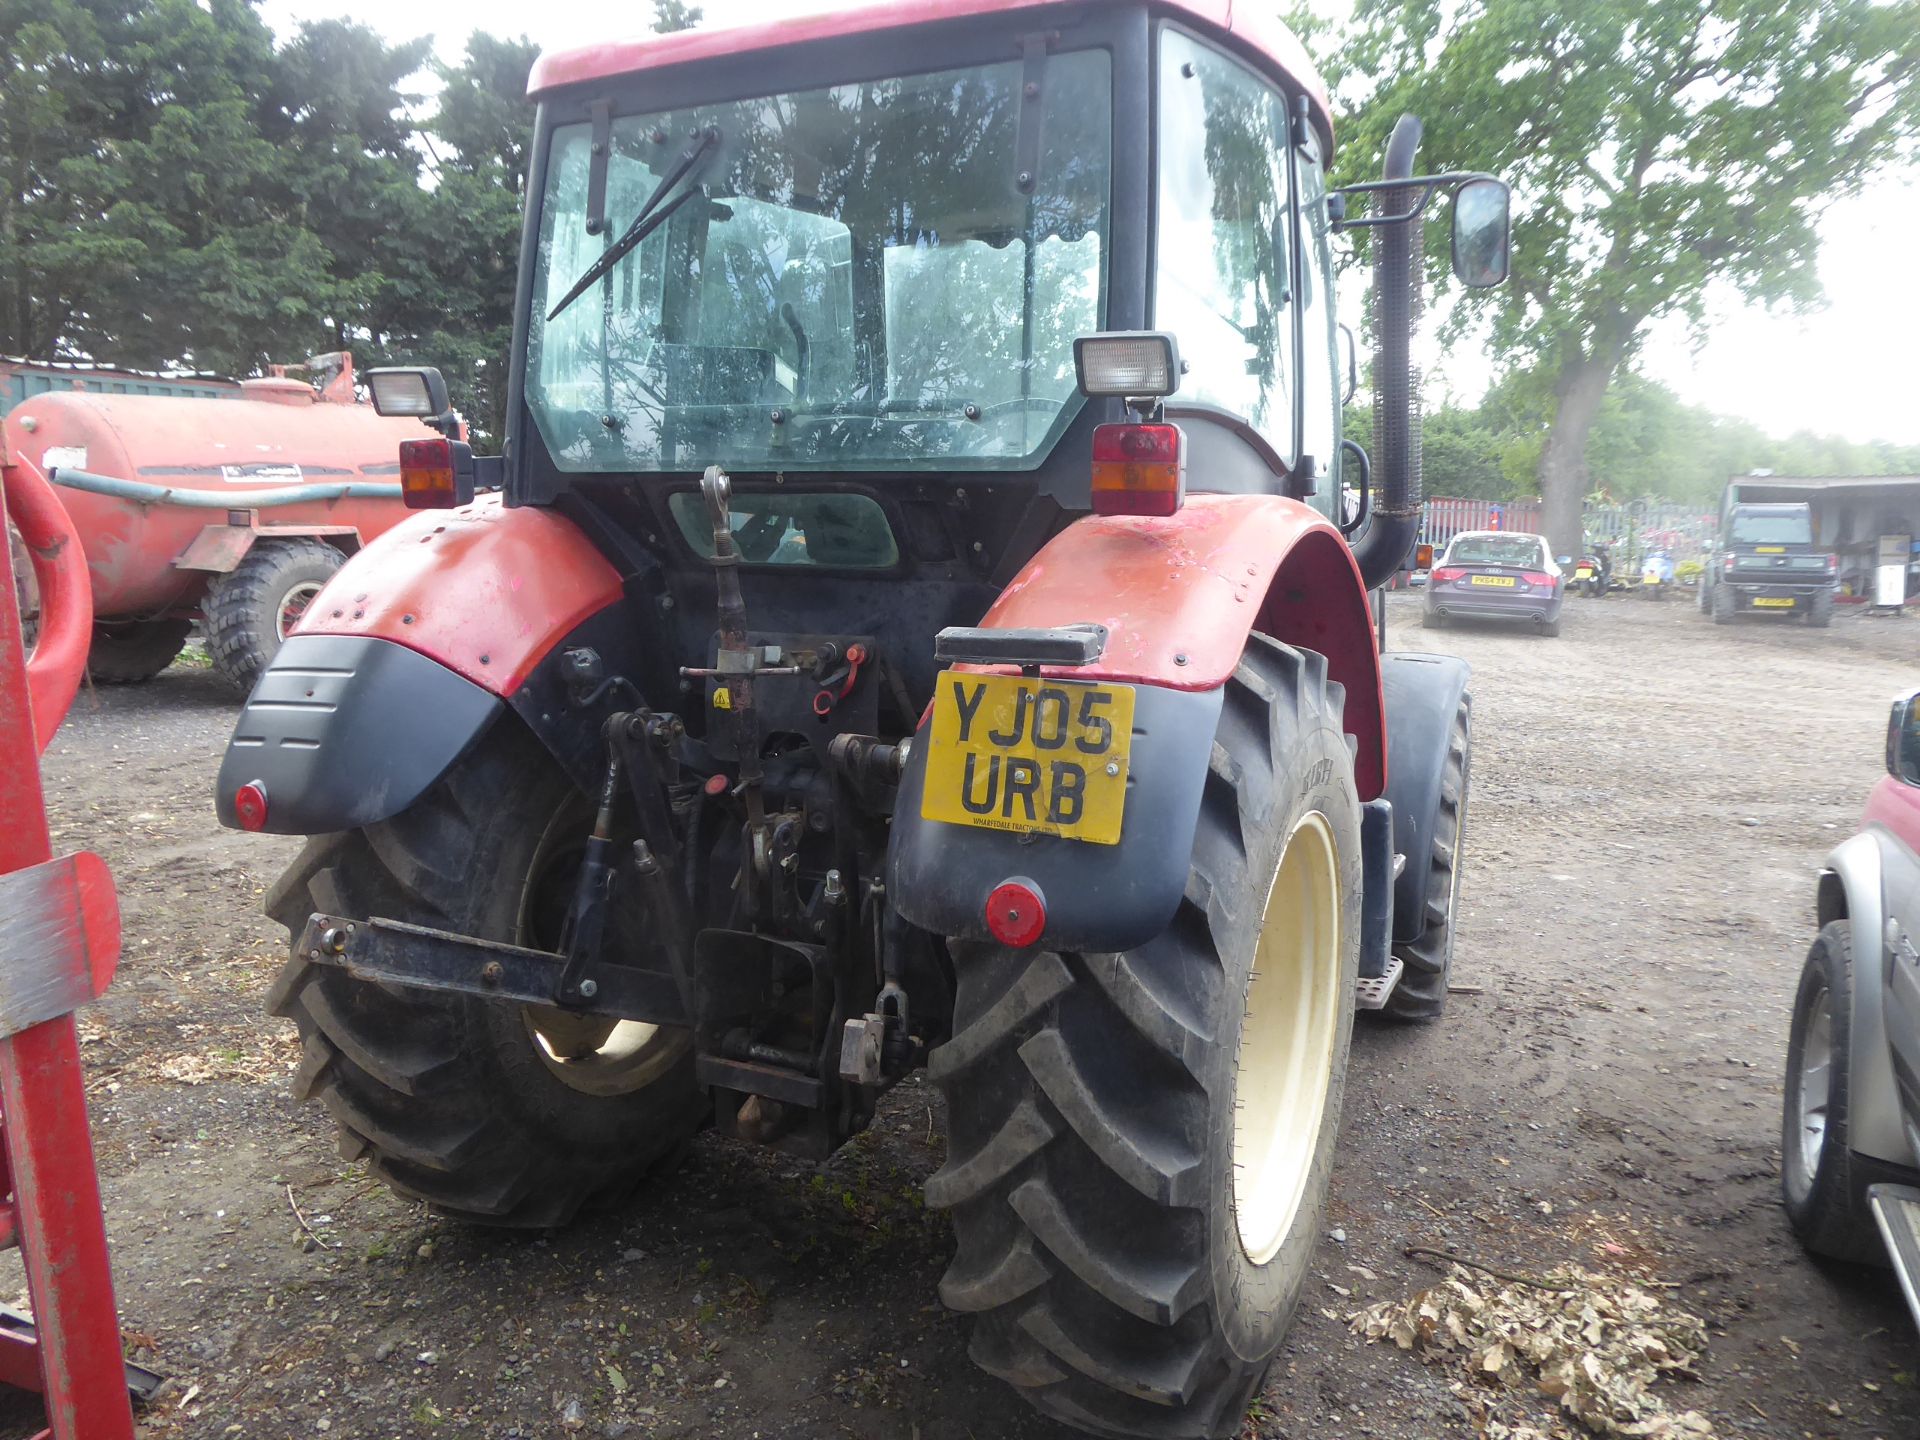 Zetor 8441 Proxima tractor c/w Traclift loader, 2005, 6433Hrs, YJ05 URB - Image 2 of 3